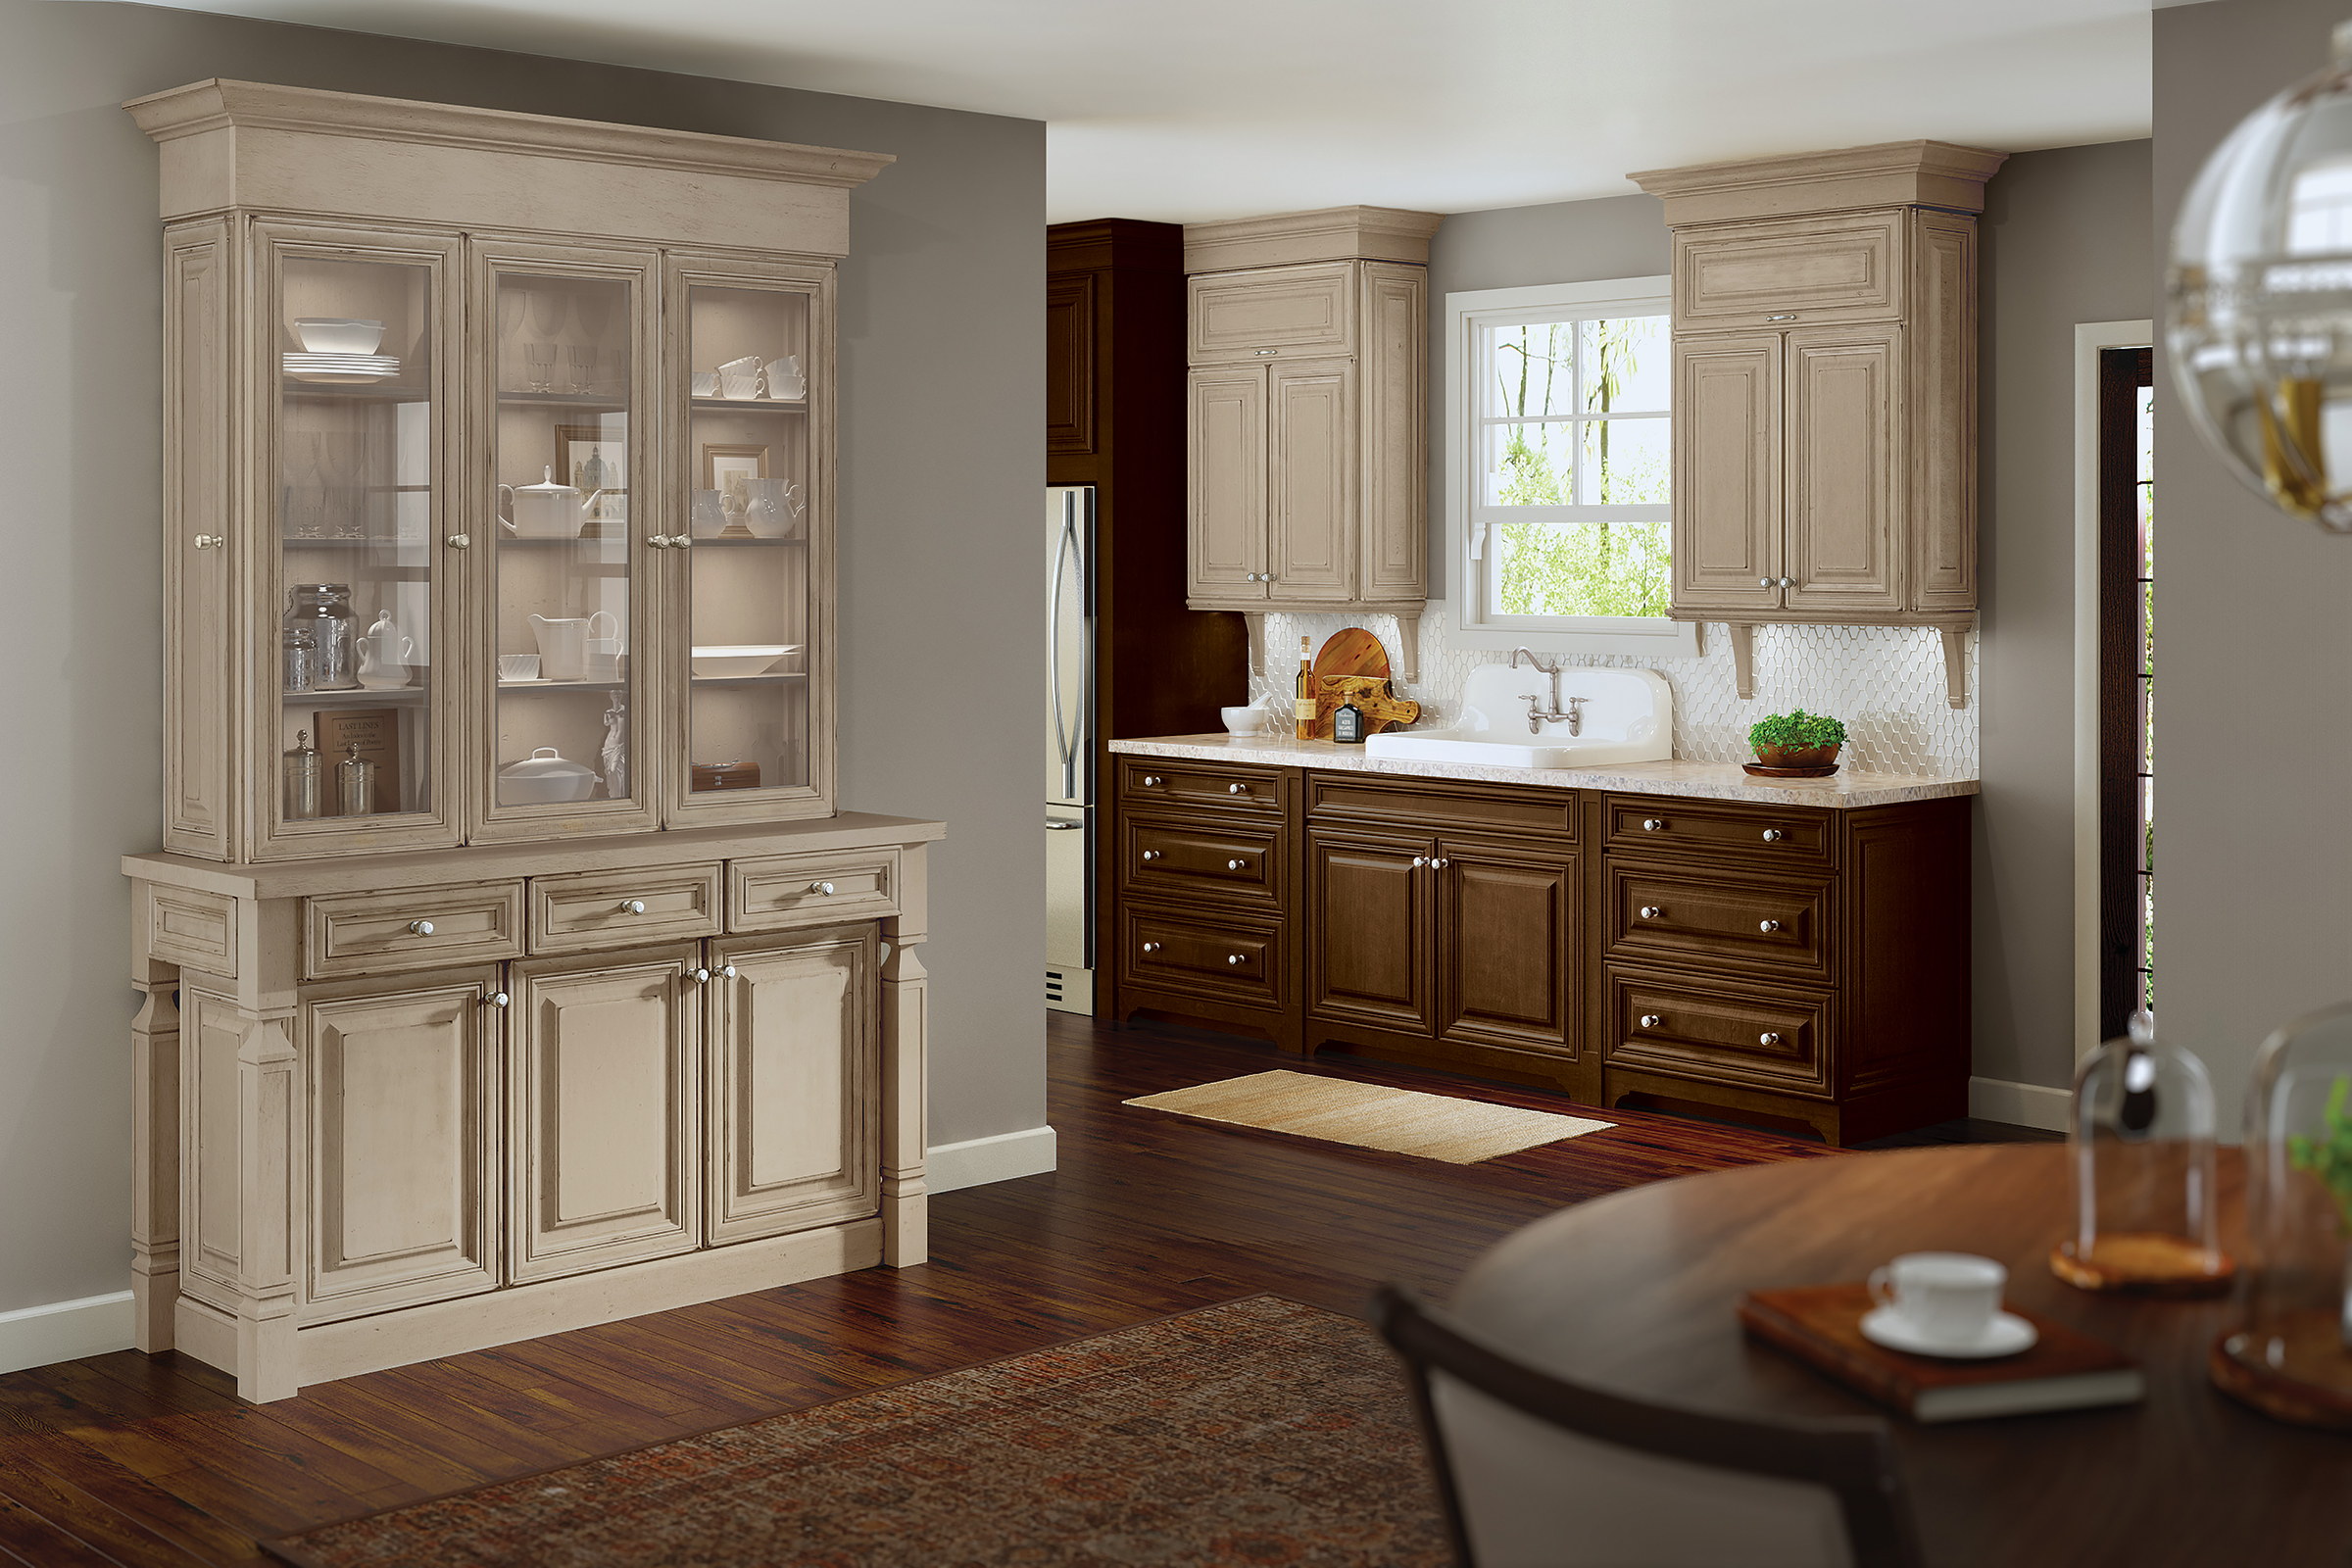 KraftMaid Custom Kitchen Remodel Ideas with Wooden Cabinetry